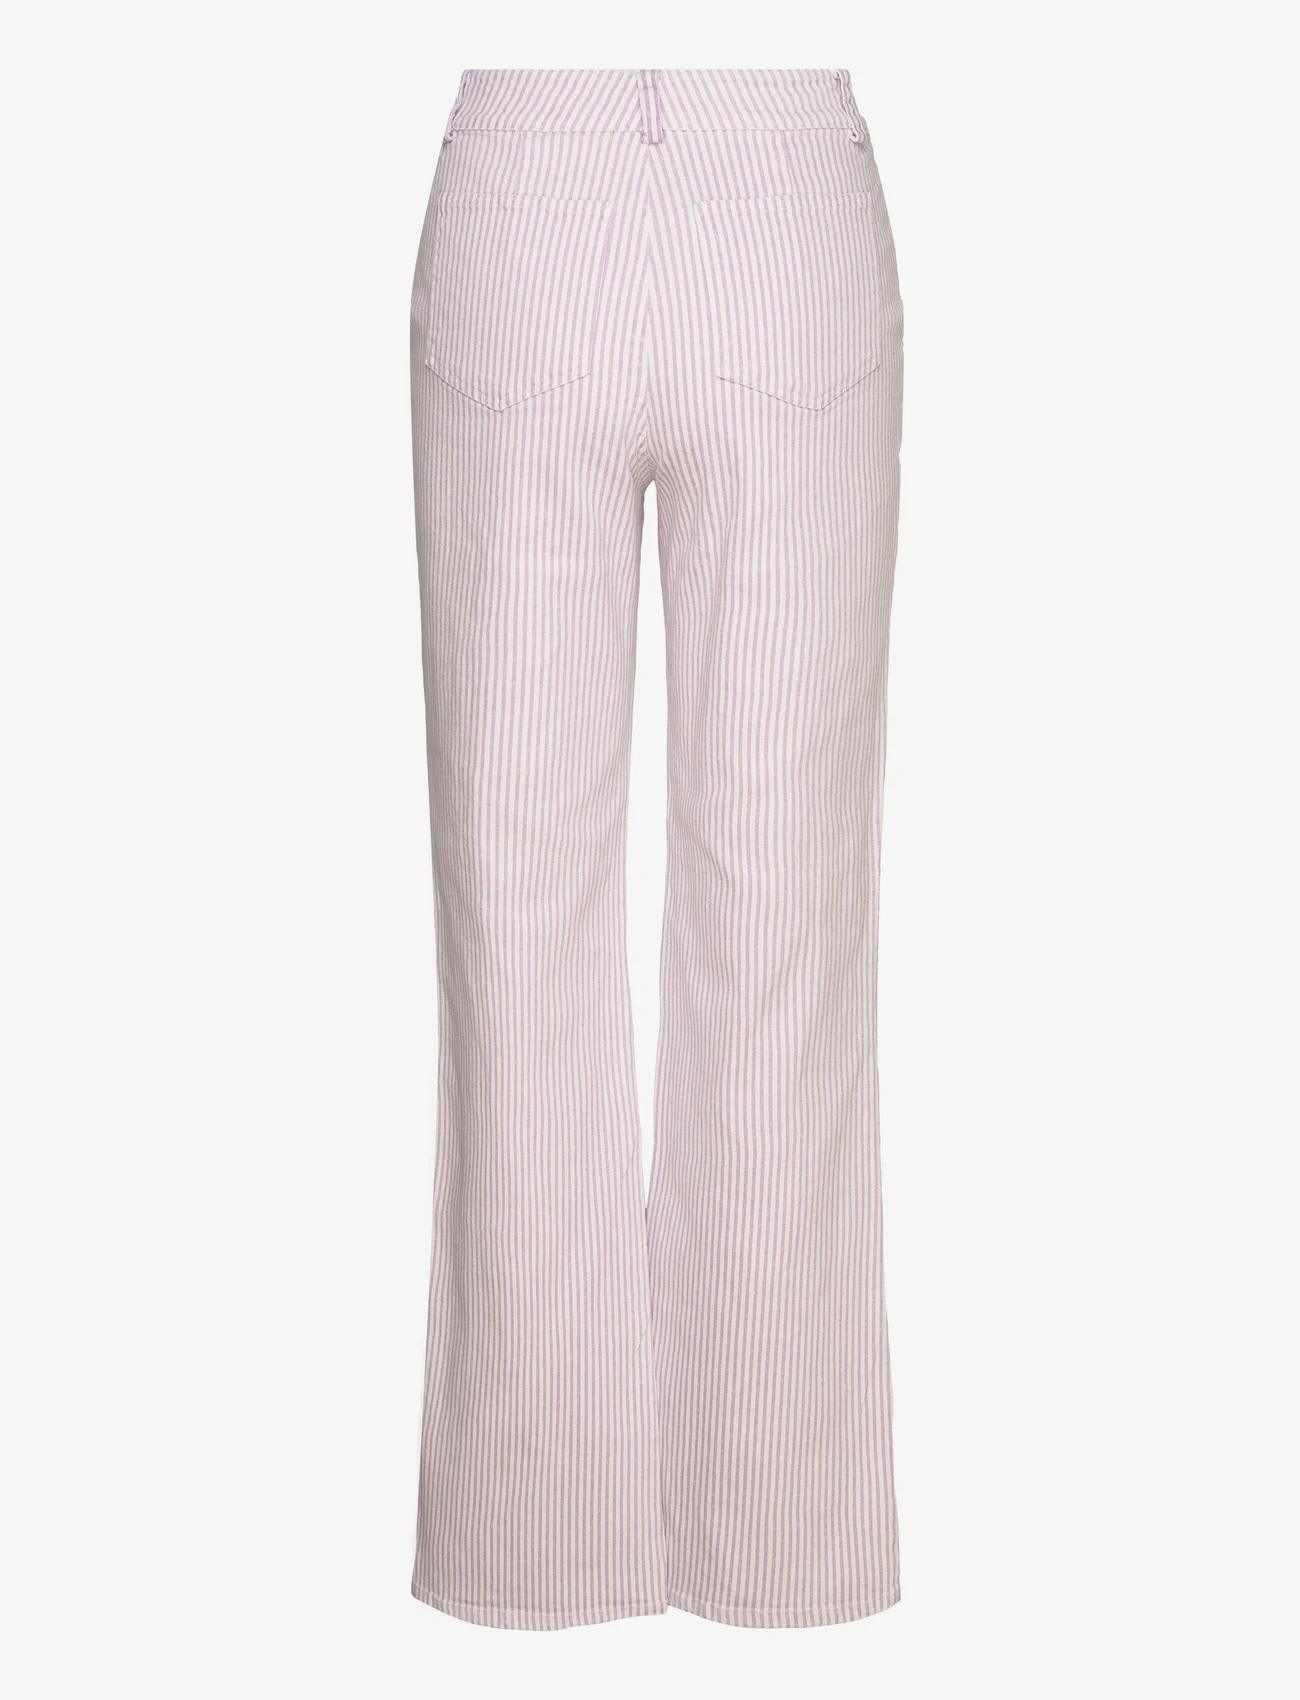 Coster Copenhagen - CC Heart MATHILDE striped pants - party wear at outlet prices - off white/purple stripe - 1